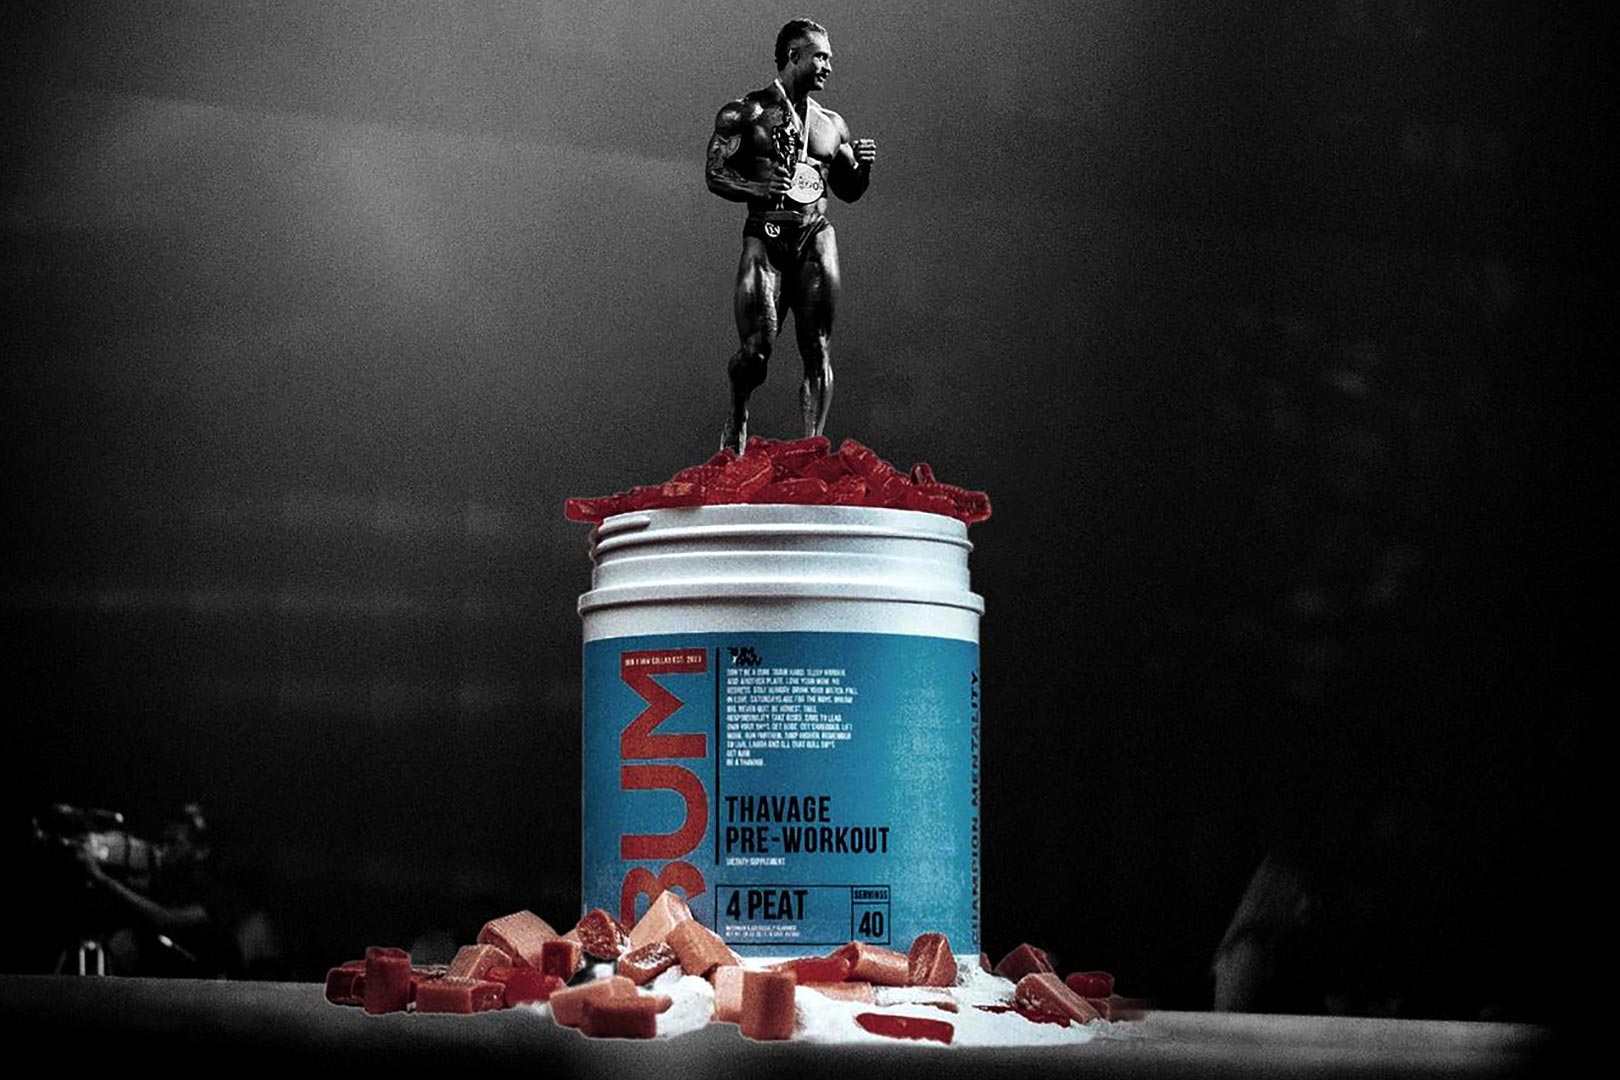 Raw Confirms 4 Peat Flavor Of Thavage Pre Workout